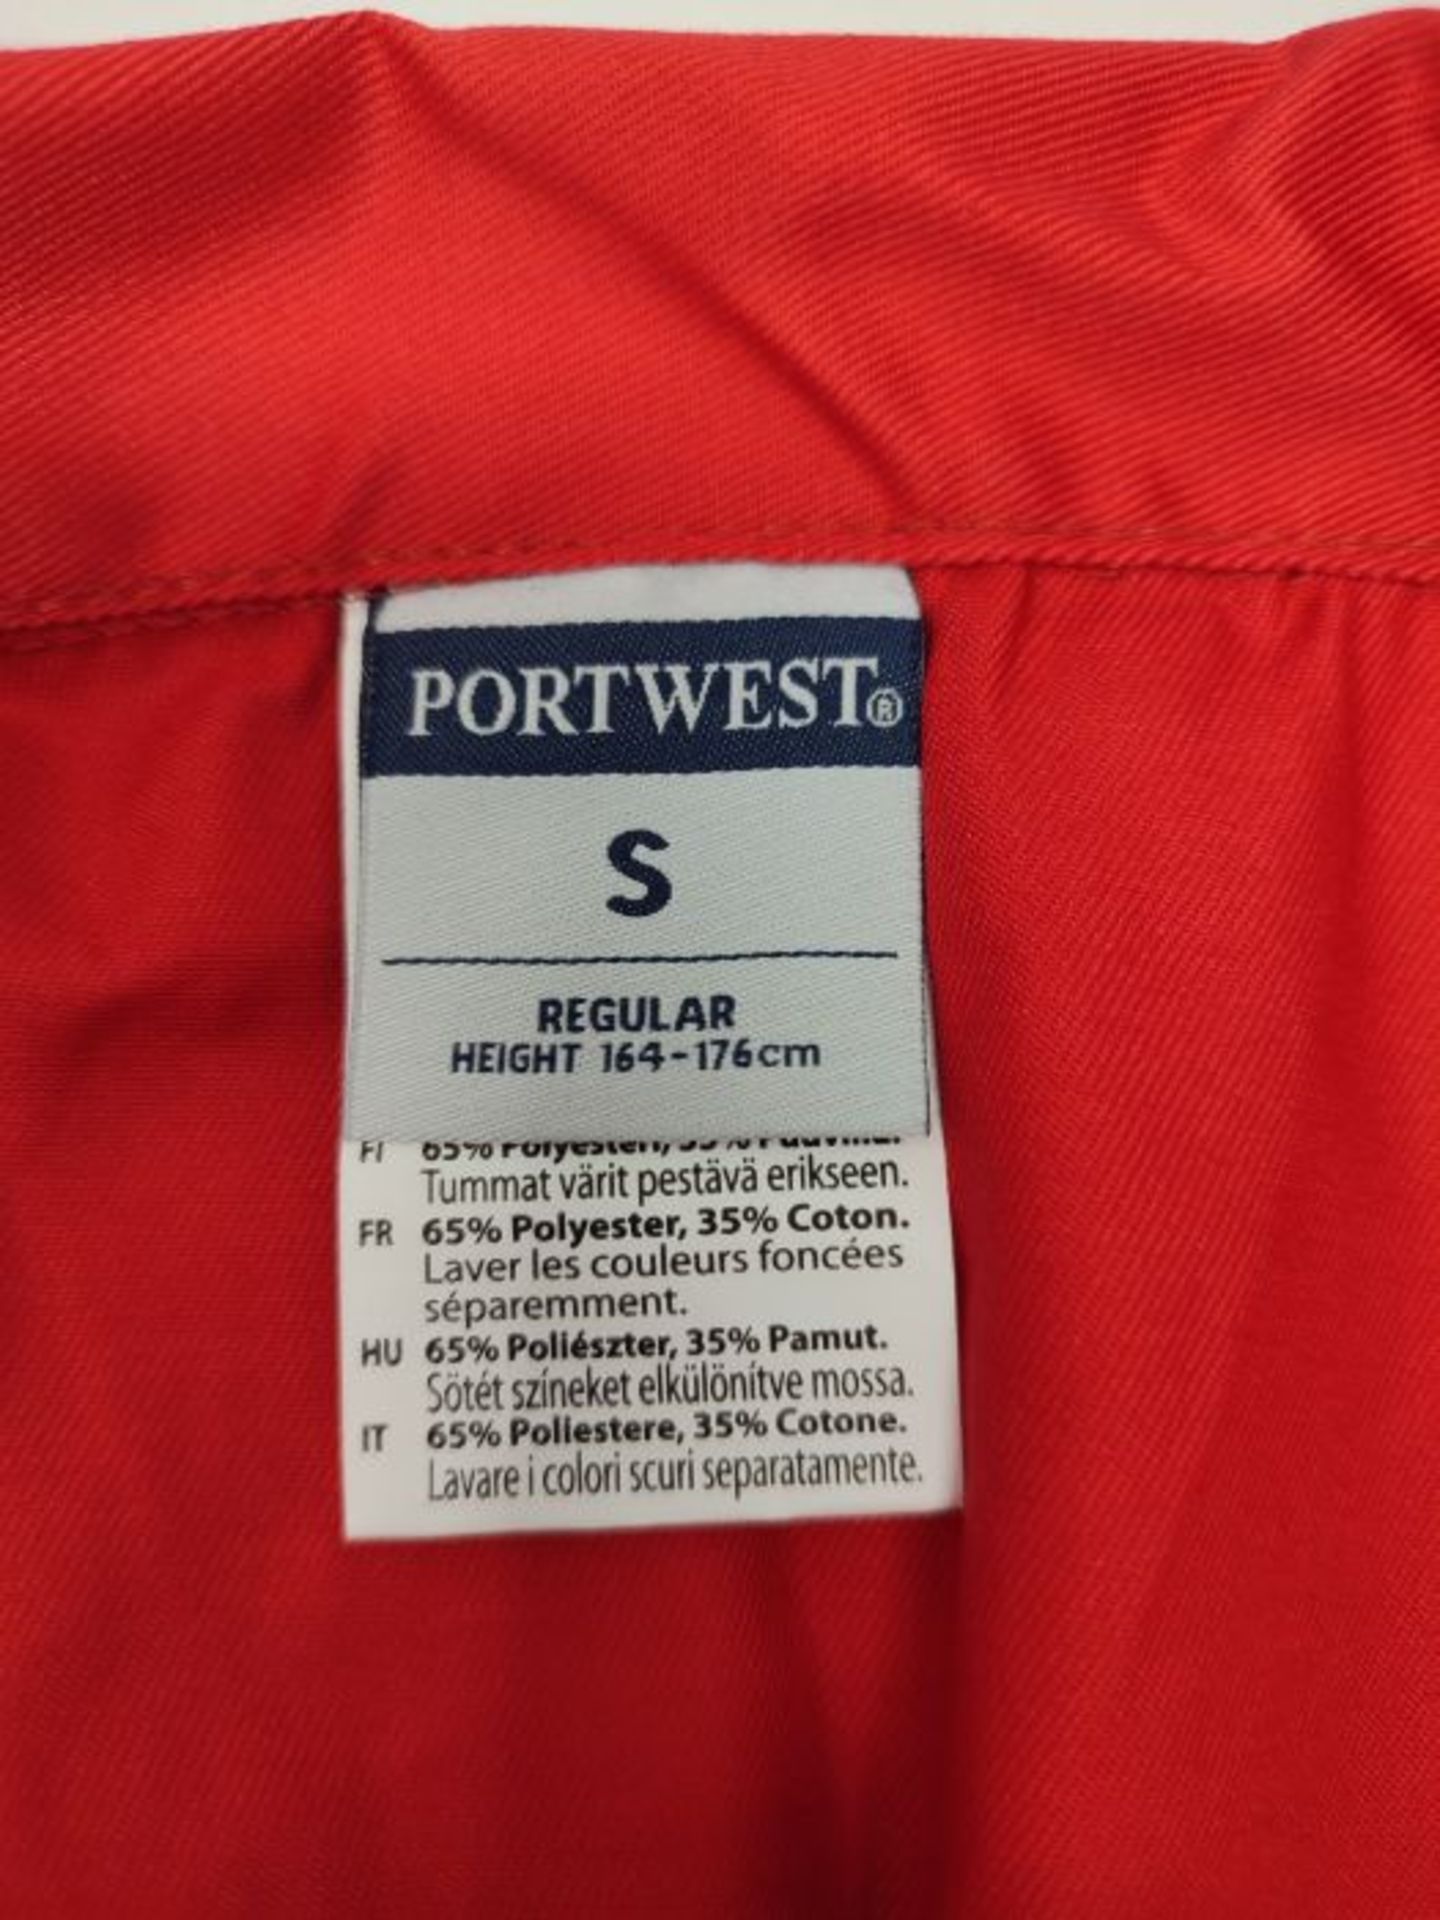 Portwest S999 Euro Workwear Coverall Red, Small - Image 3 of 3